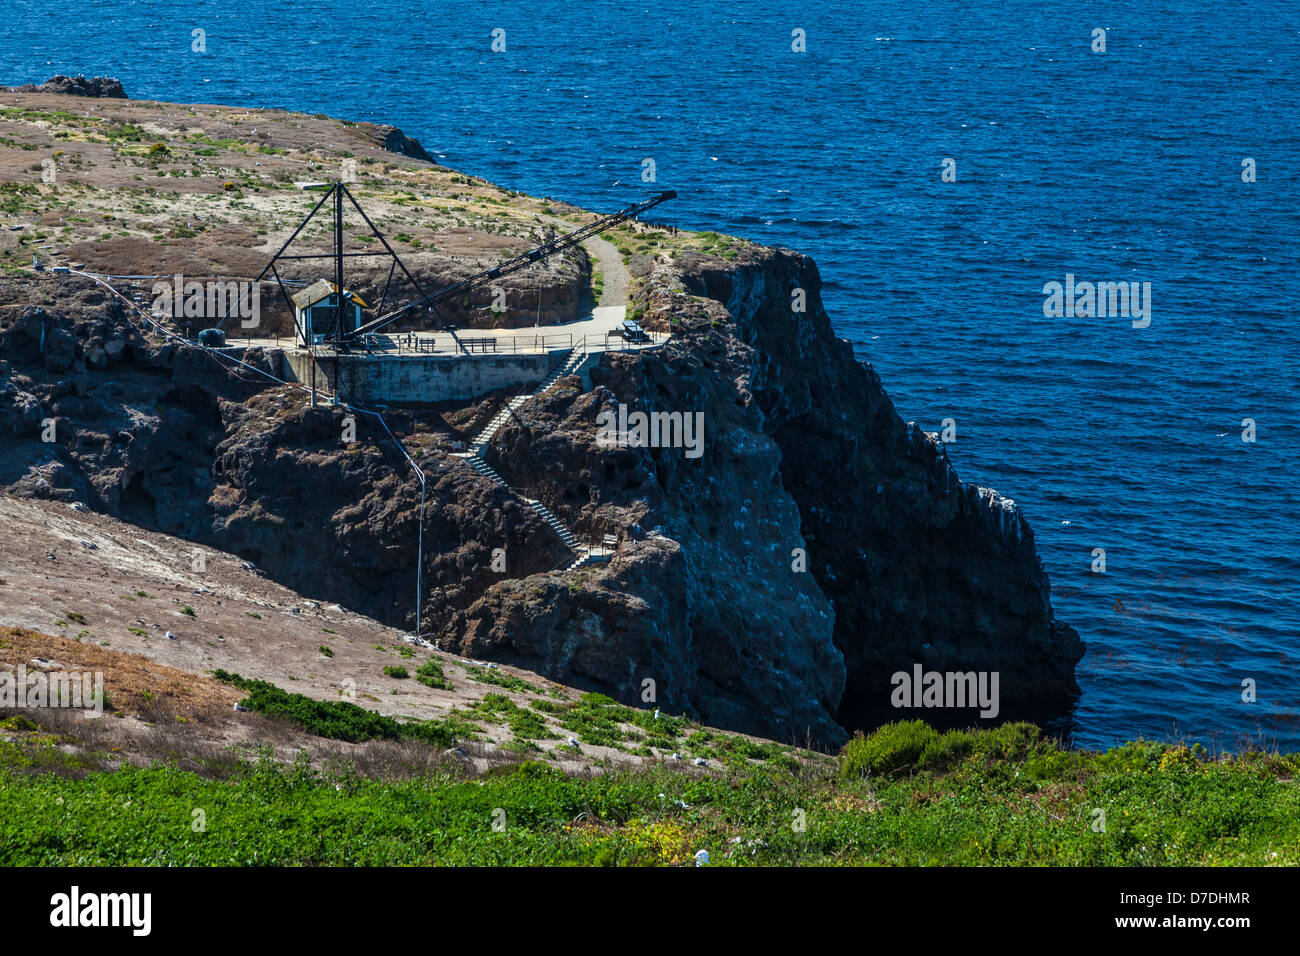 Hoist and steps at Landing Cove on East Anacapa Island that visitors climb; Channel Islands National Park, California, USA Stock Photo